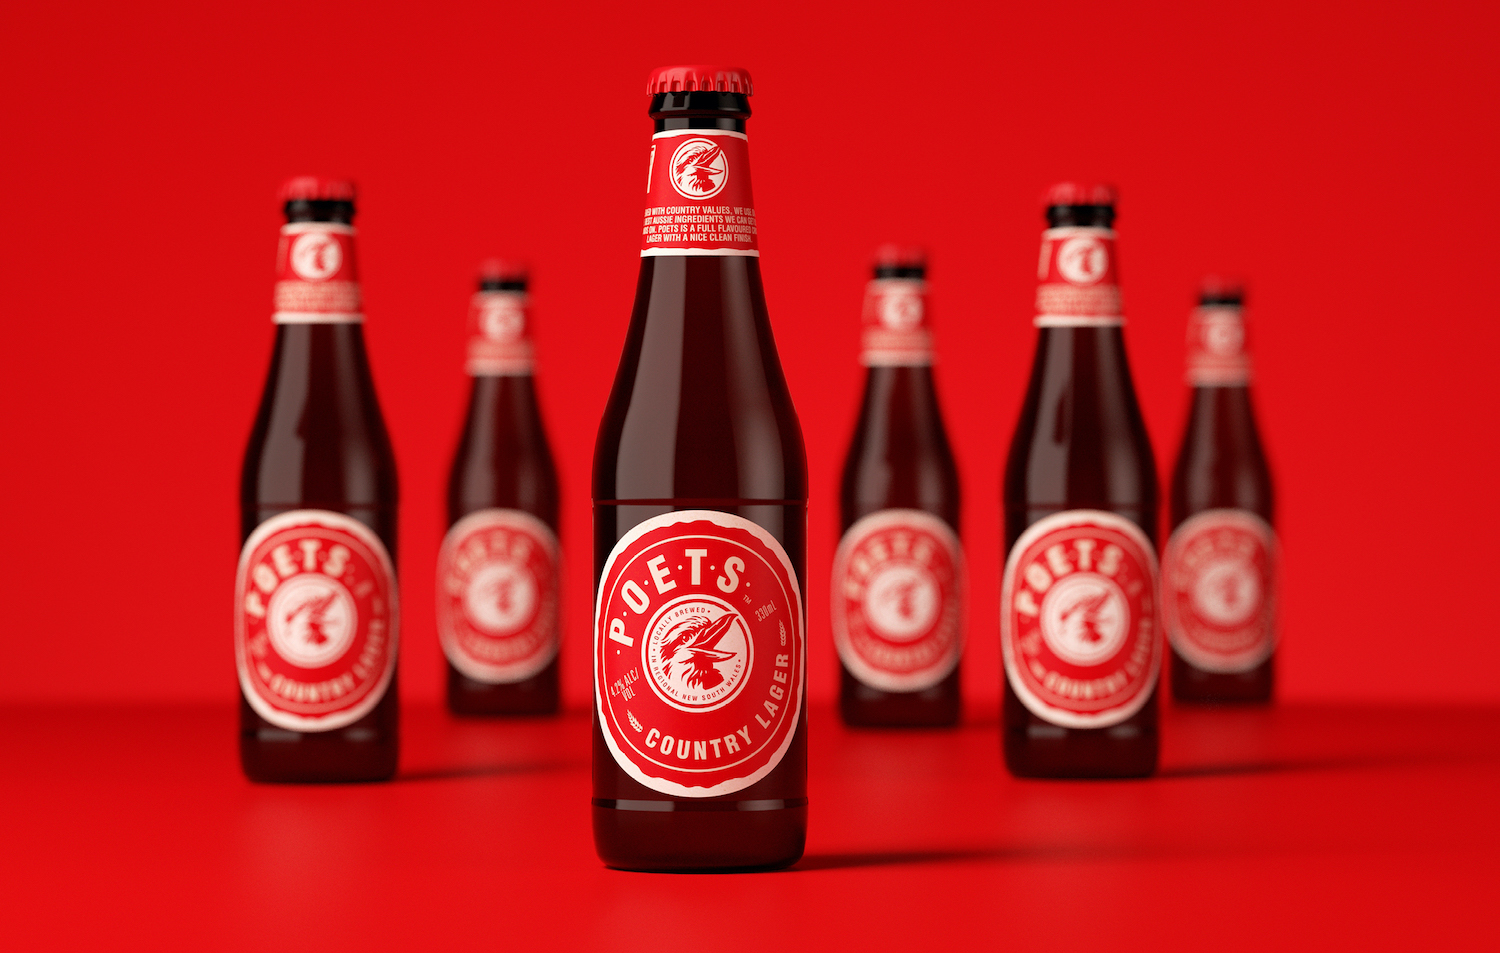 Poets Country Lager: Name, Brand Identity and Packaging Design